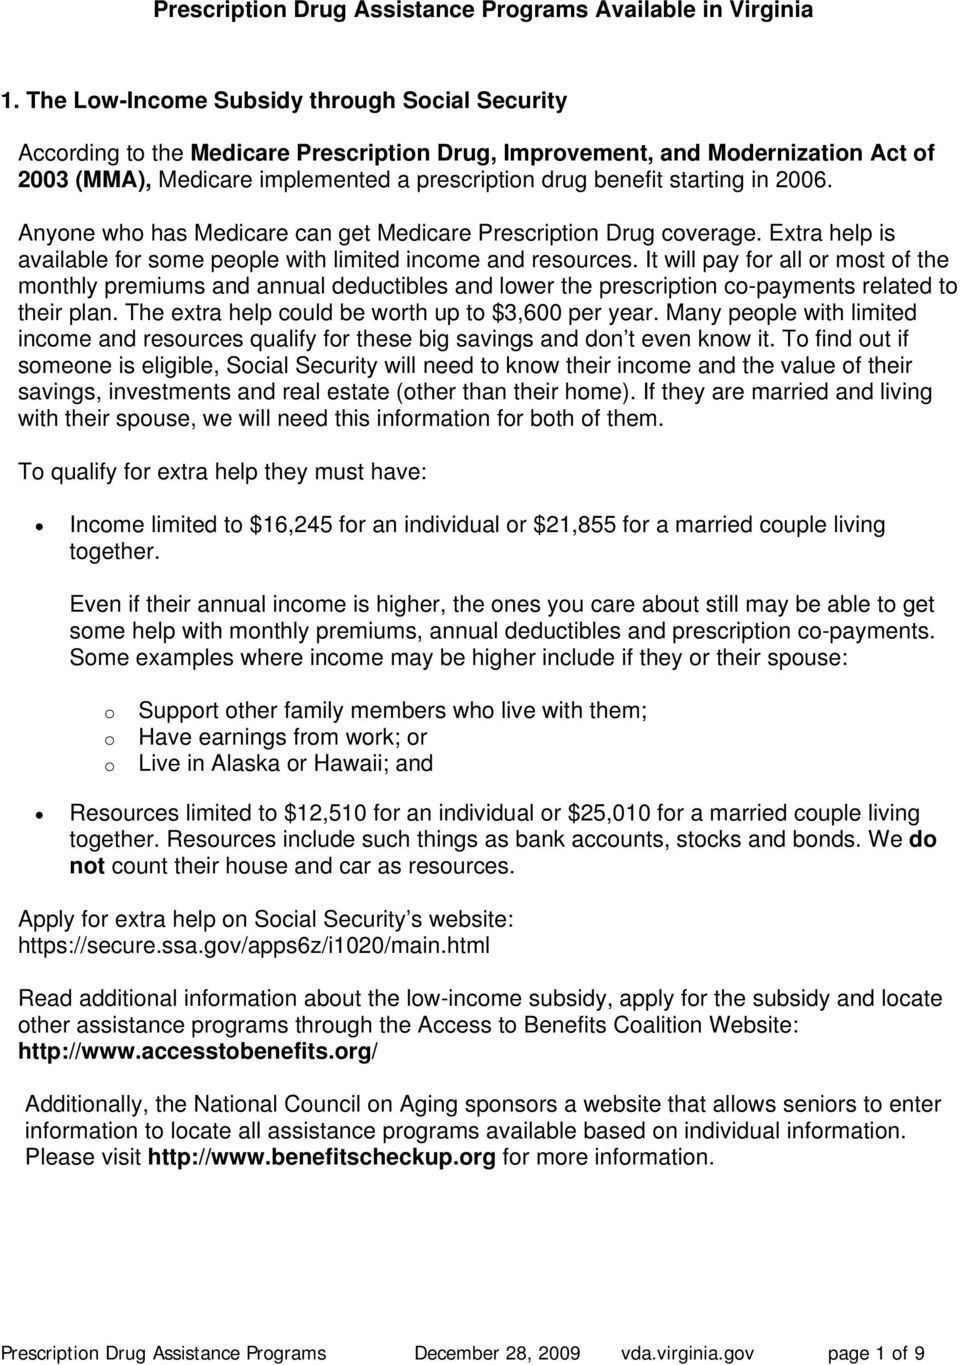 in 2006. Anyone who has Medicare can get Medicare Prescription Drug coverage. Extra help is available for some people with limited income and resources.